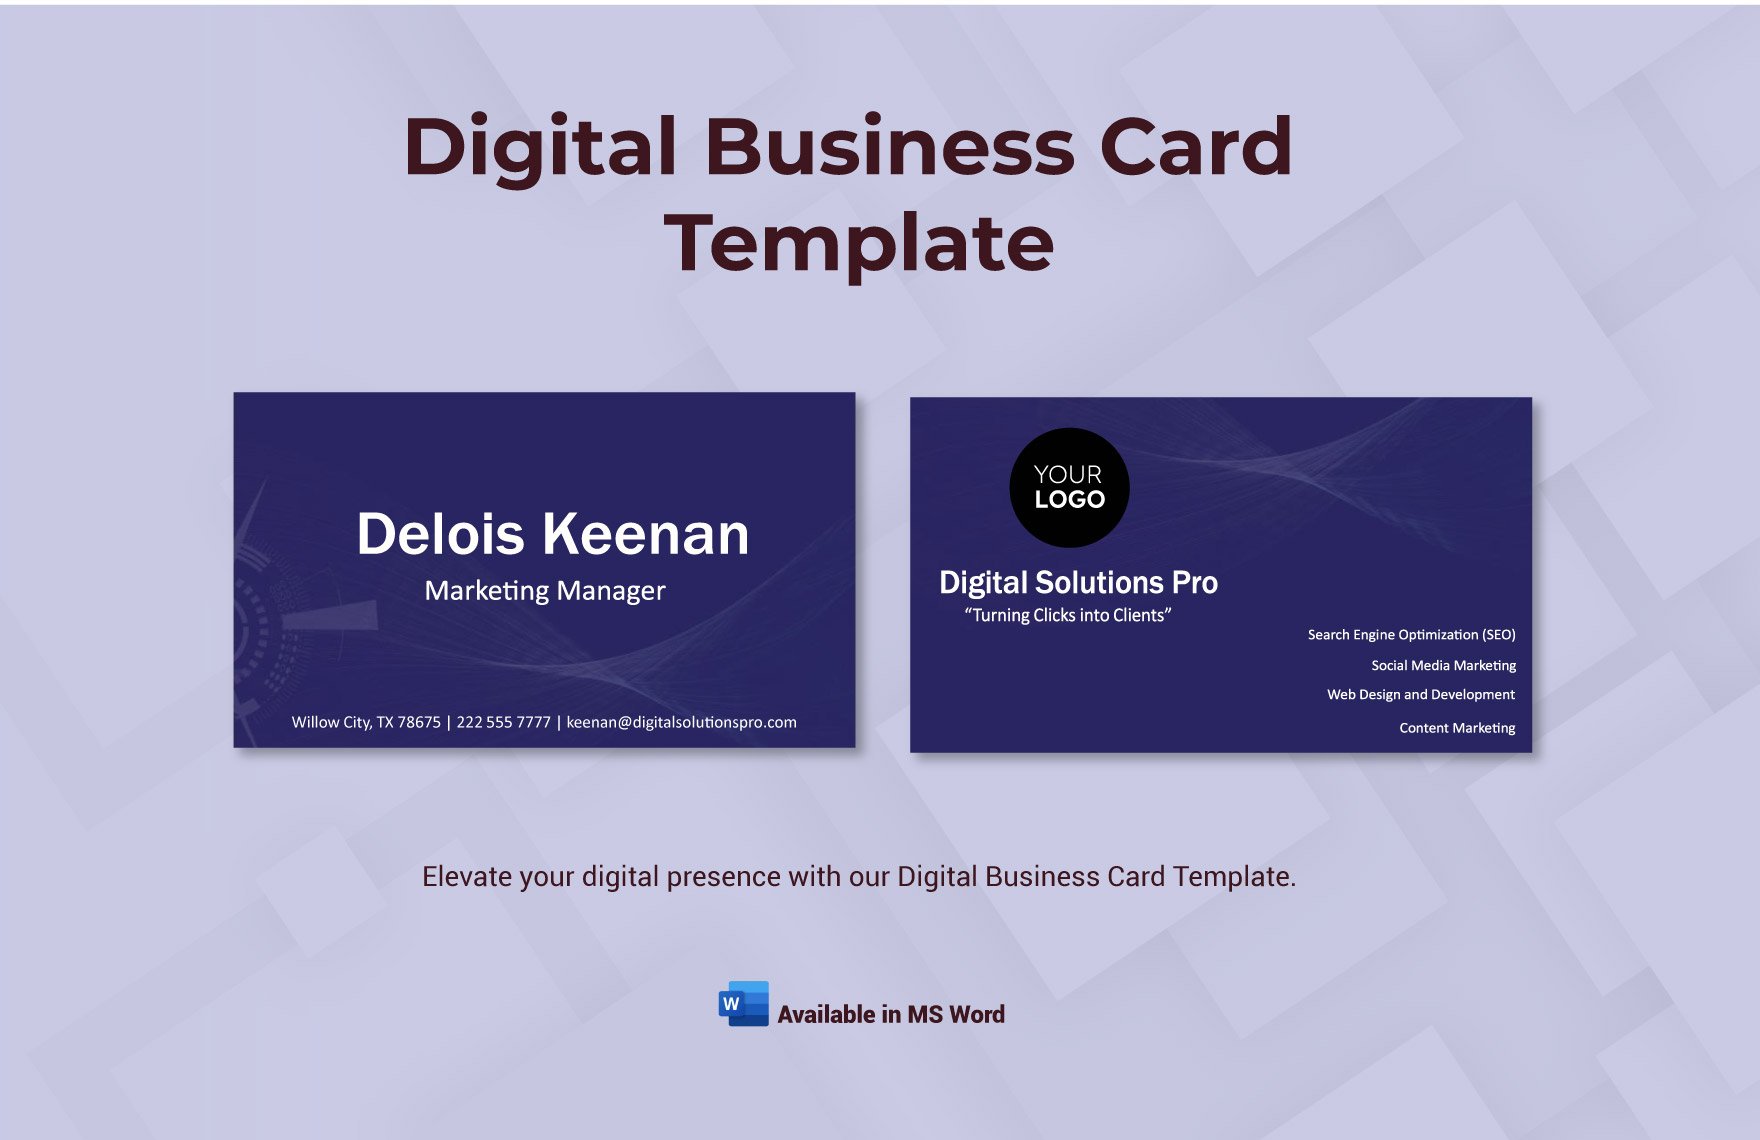 Digital Business Card Template in Word